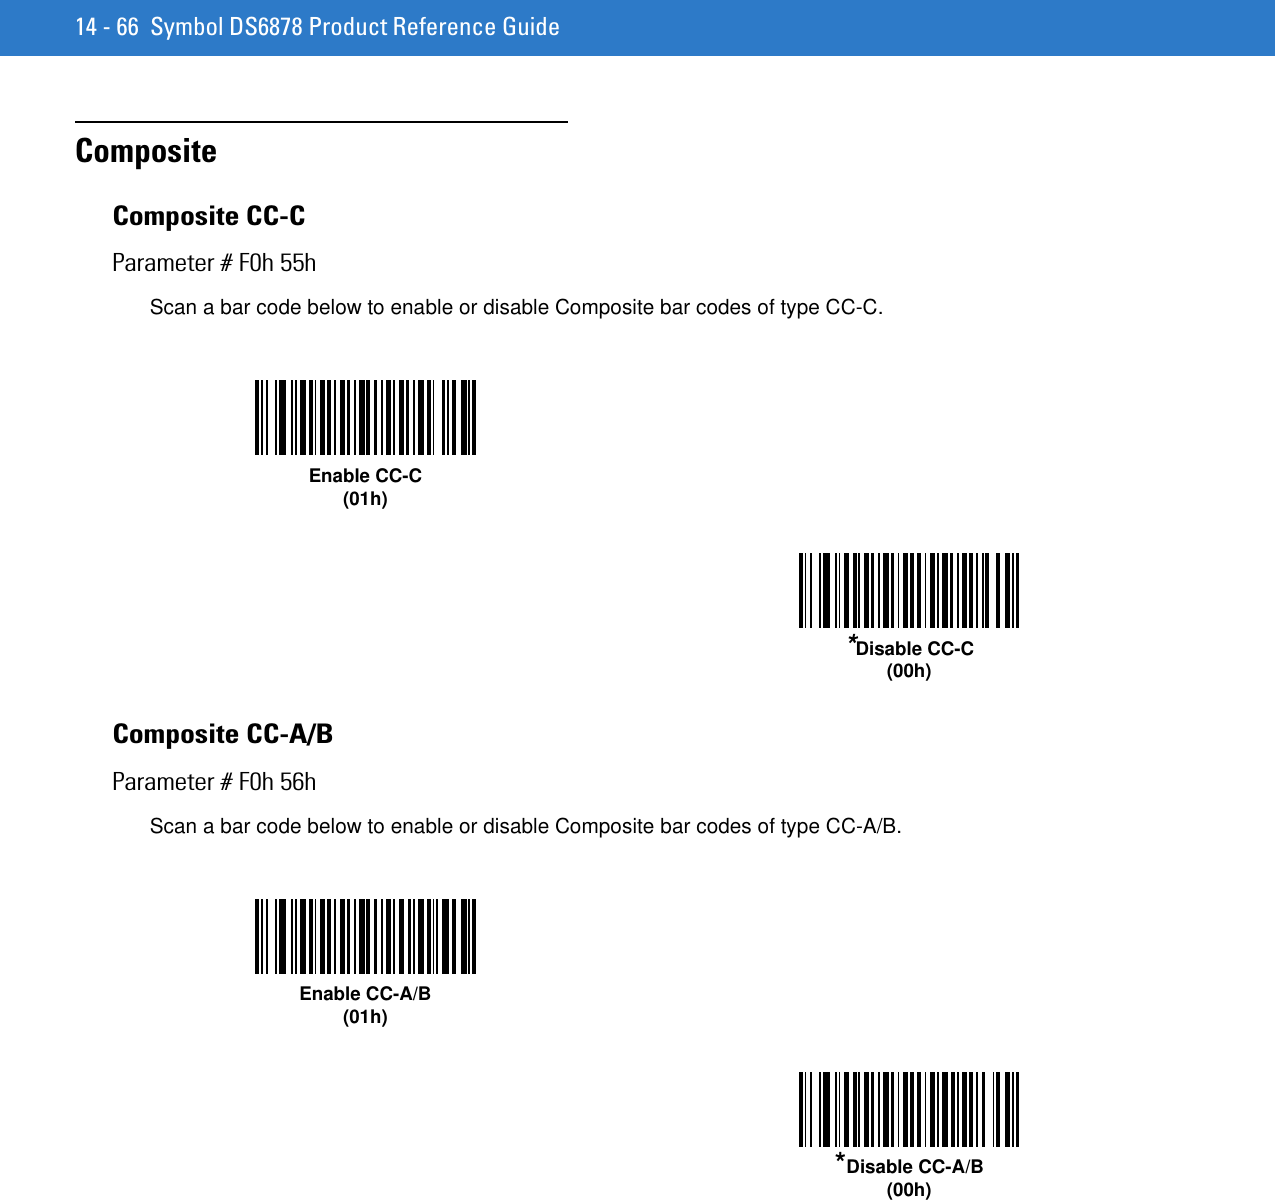 14 - 66 Symbol DS6878 Product Reference GuideComposite Composite CC-CParameter # F0h 55hScan a bar code below to enable or disable Composite bar codes of type CC-C. Composite CC-A/BParameter # F0h 56hScan a bar code below to enable or disable Composite bar codes of type CC-A/B. Enable CC-C(01h)*Disable CC-C(00h)Enable CC-A/B(01h)*Disable CC-A/B(00h)